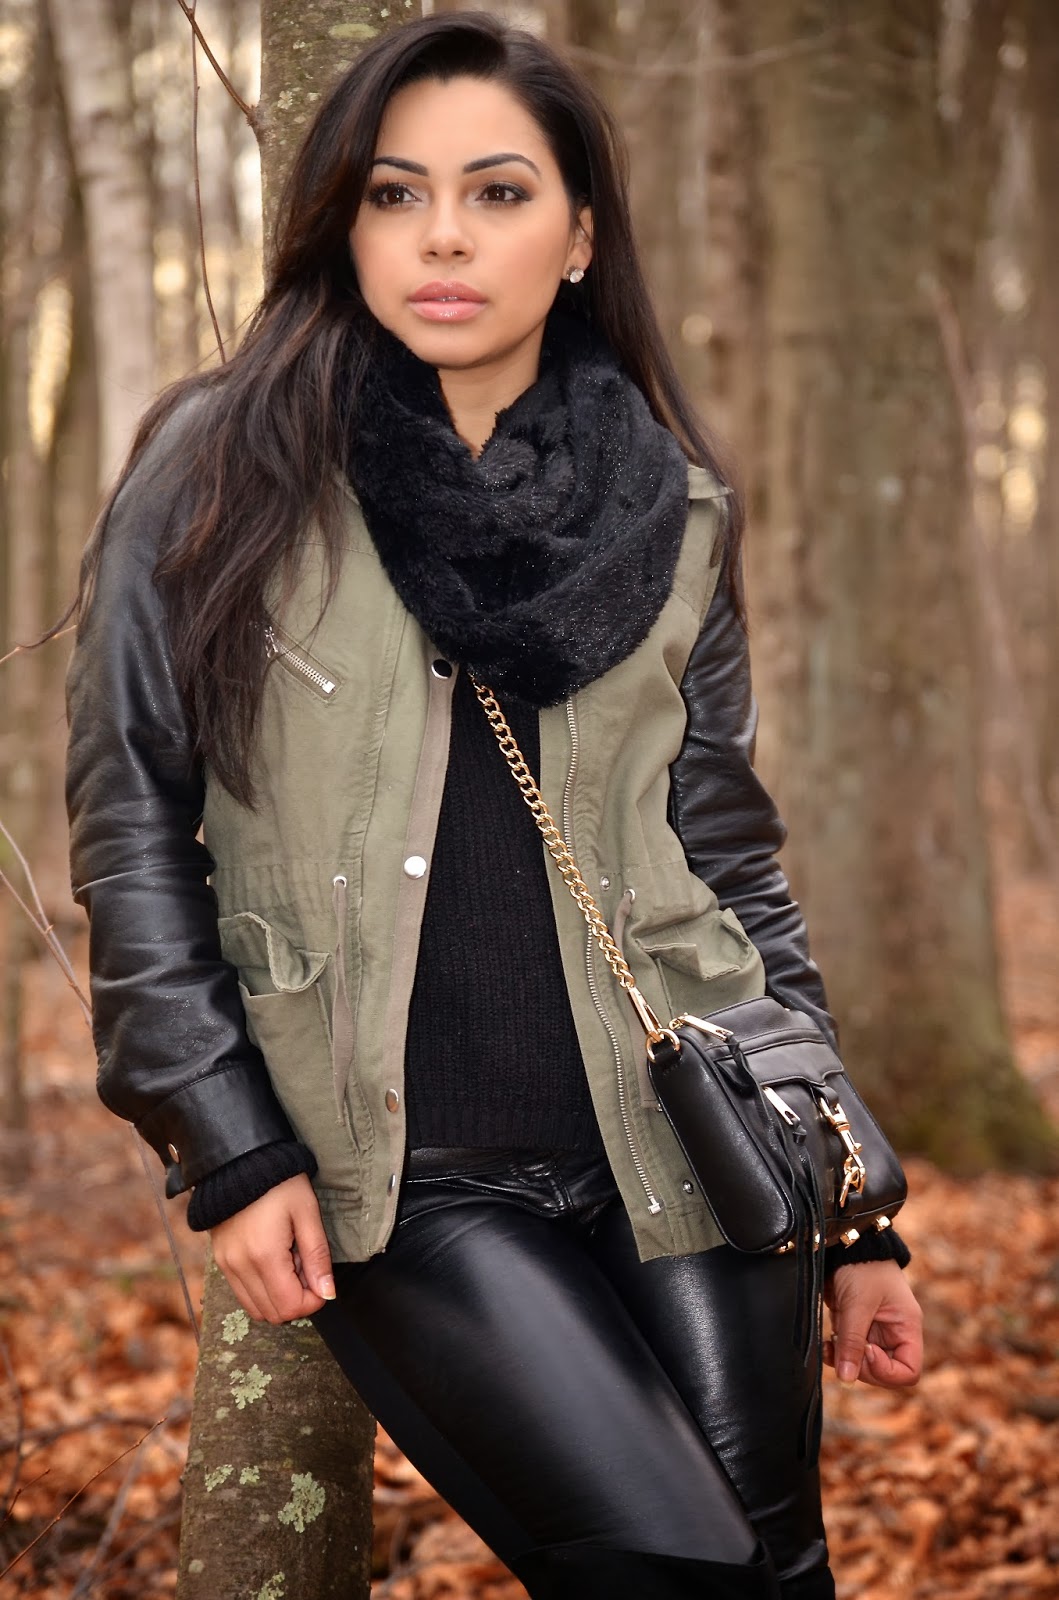 REBECCA MINKOFF AND LEATHER | The Style Brunch